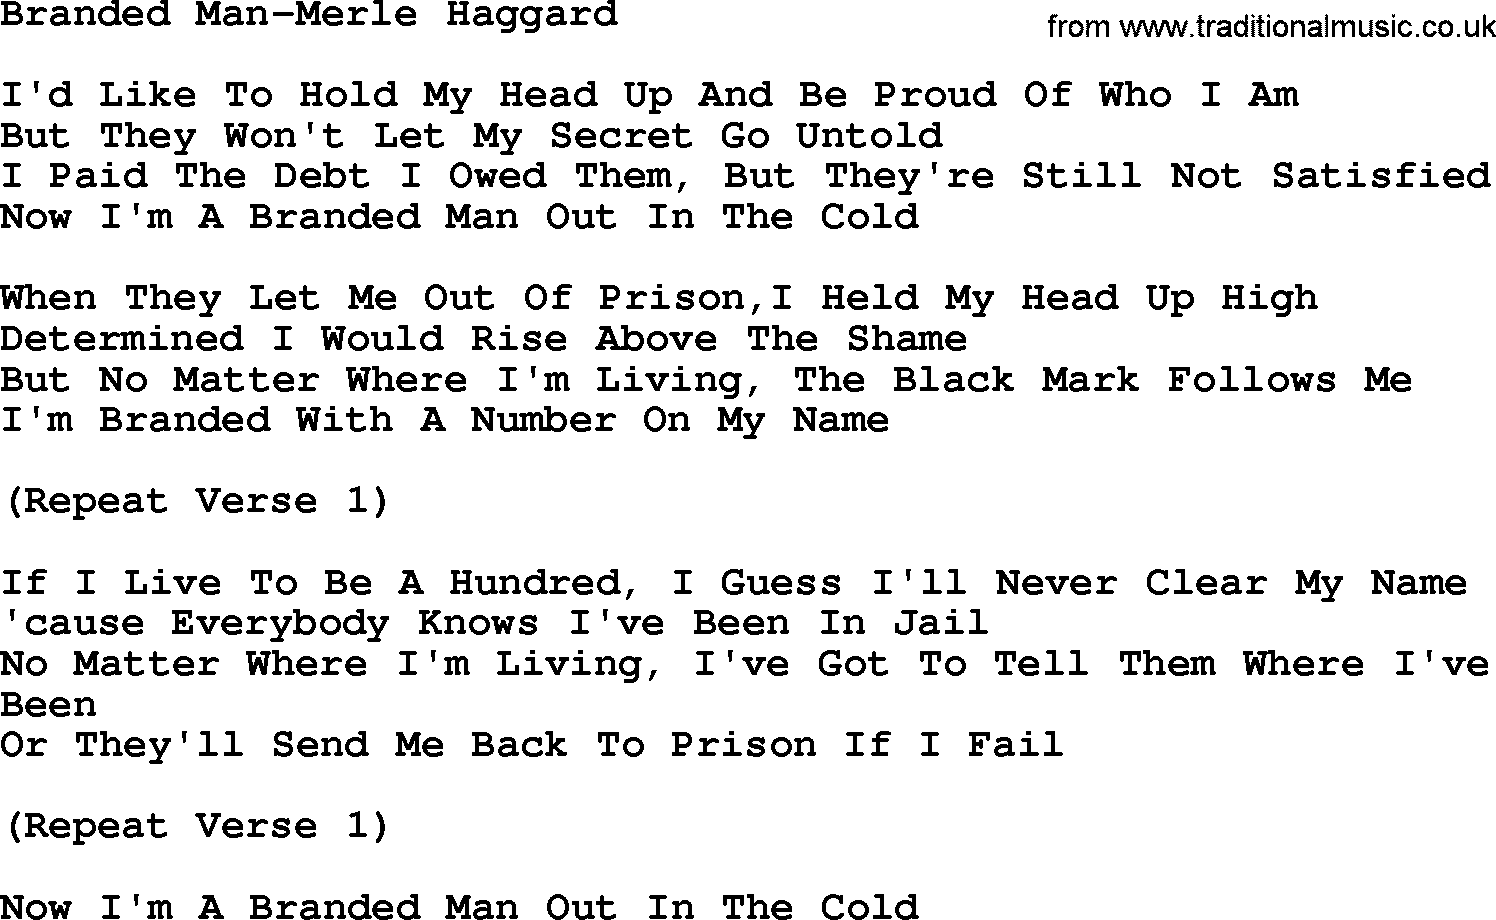 Country music song: Branded Man-Merle Haggard lyrics and chords